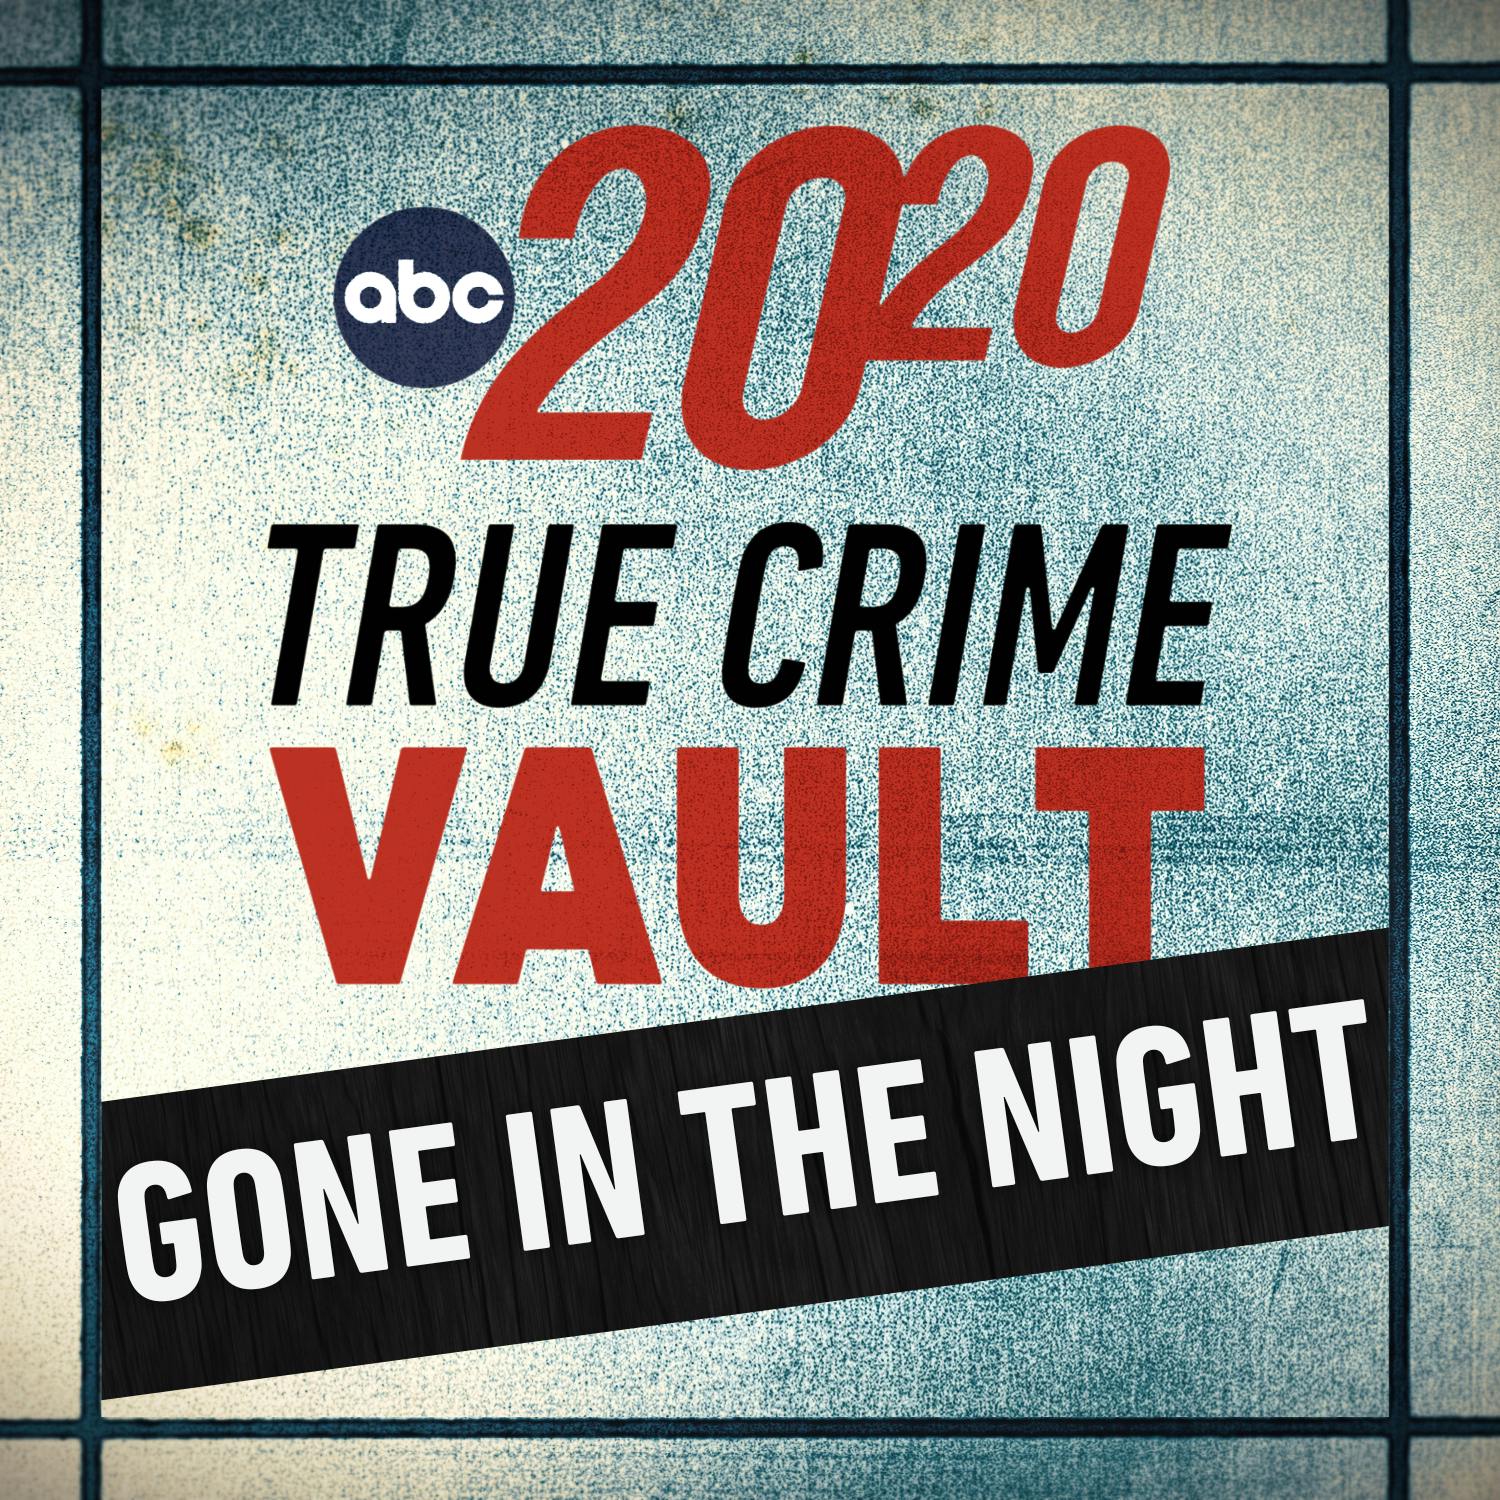 True Crime Vault: Gone in the Night by ABC News